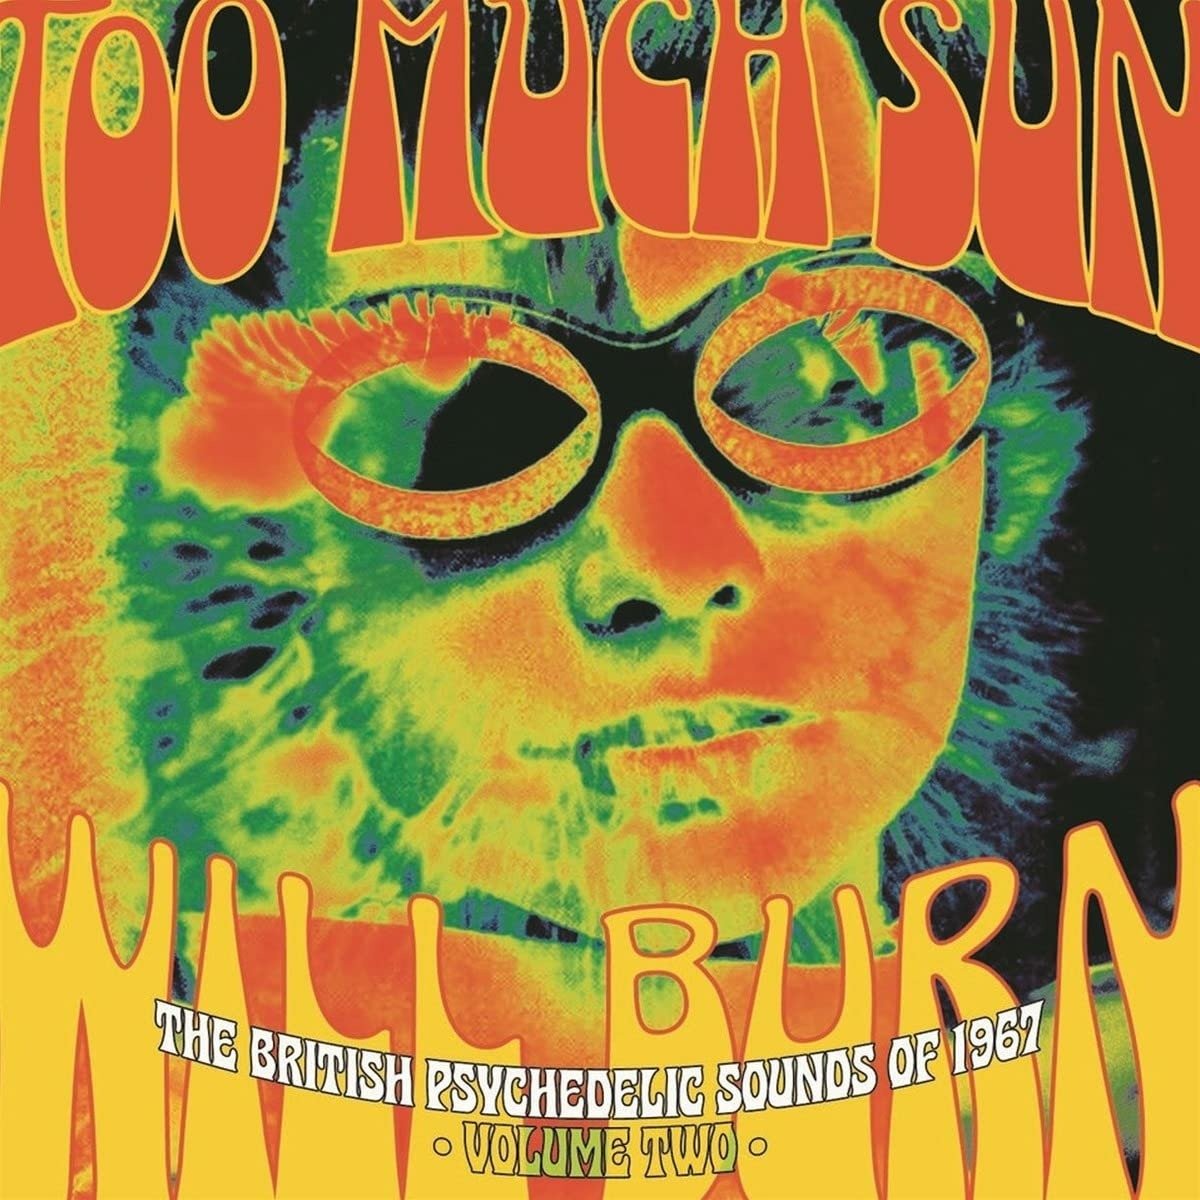 CD Shop - V/A TOO MUCH SUN WILL BURN: BRITISH PSYCHEDELIC SOUNDS OF 1967 VOL.2